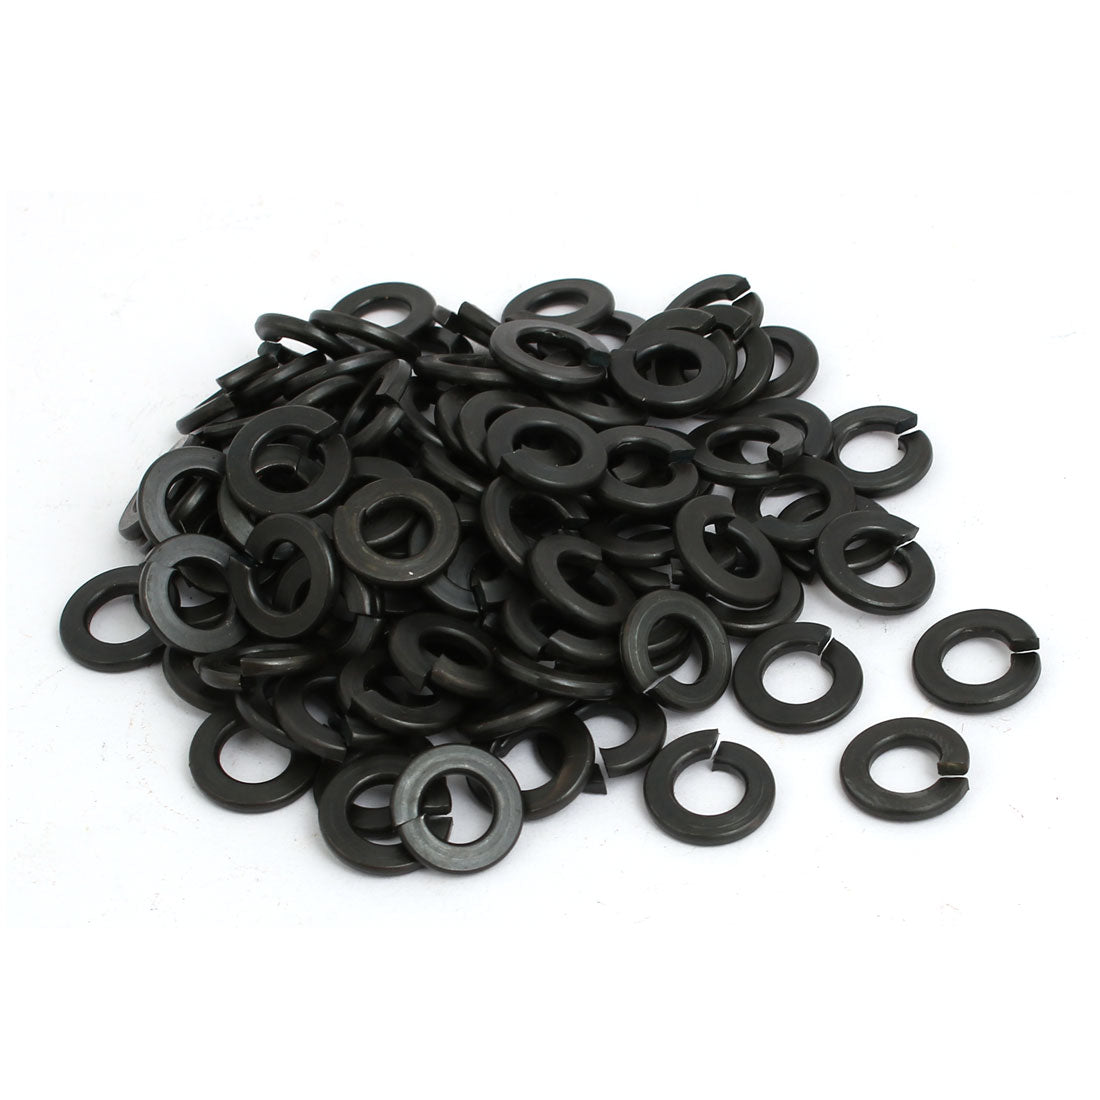 uxcell Uxcell 100pcs 1/4-inch Inner Dia Carbon Steel Split Lock Spring Washer Gasket Black